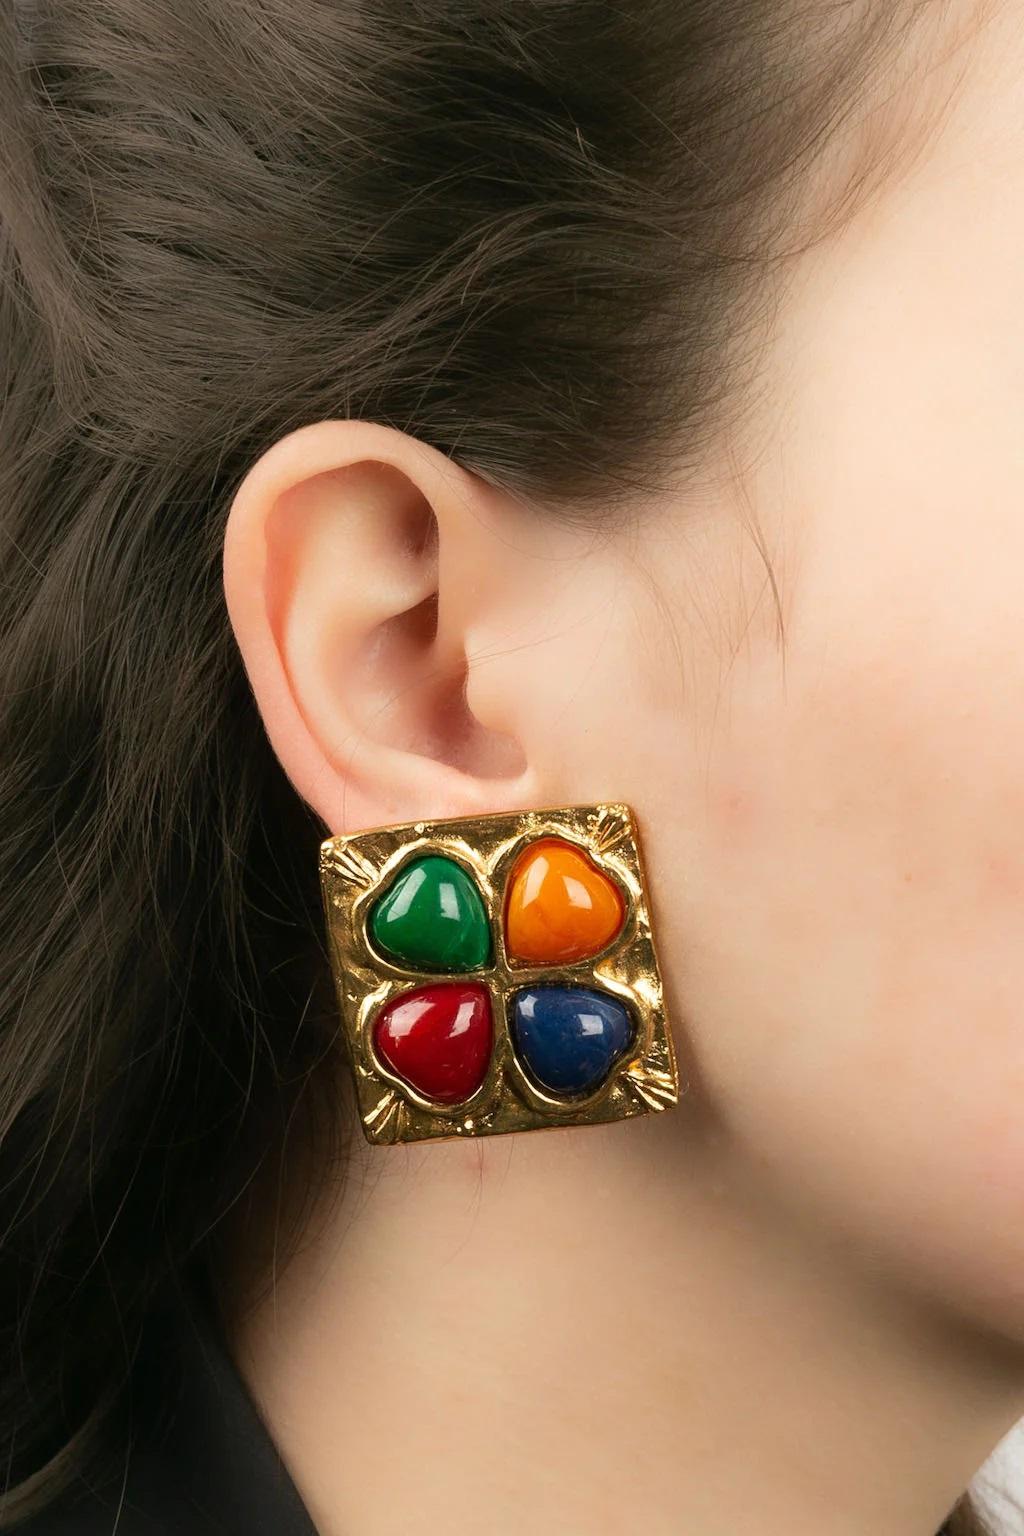 Yves Saint Laurent Hammered Metal Clip Earrings & Multicolored Resin Cabochons For Sale 2